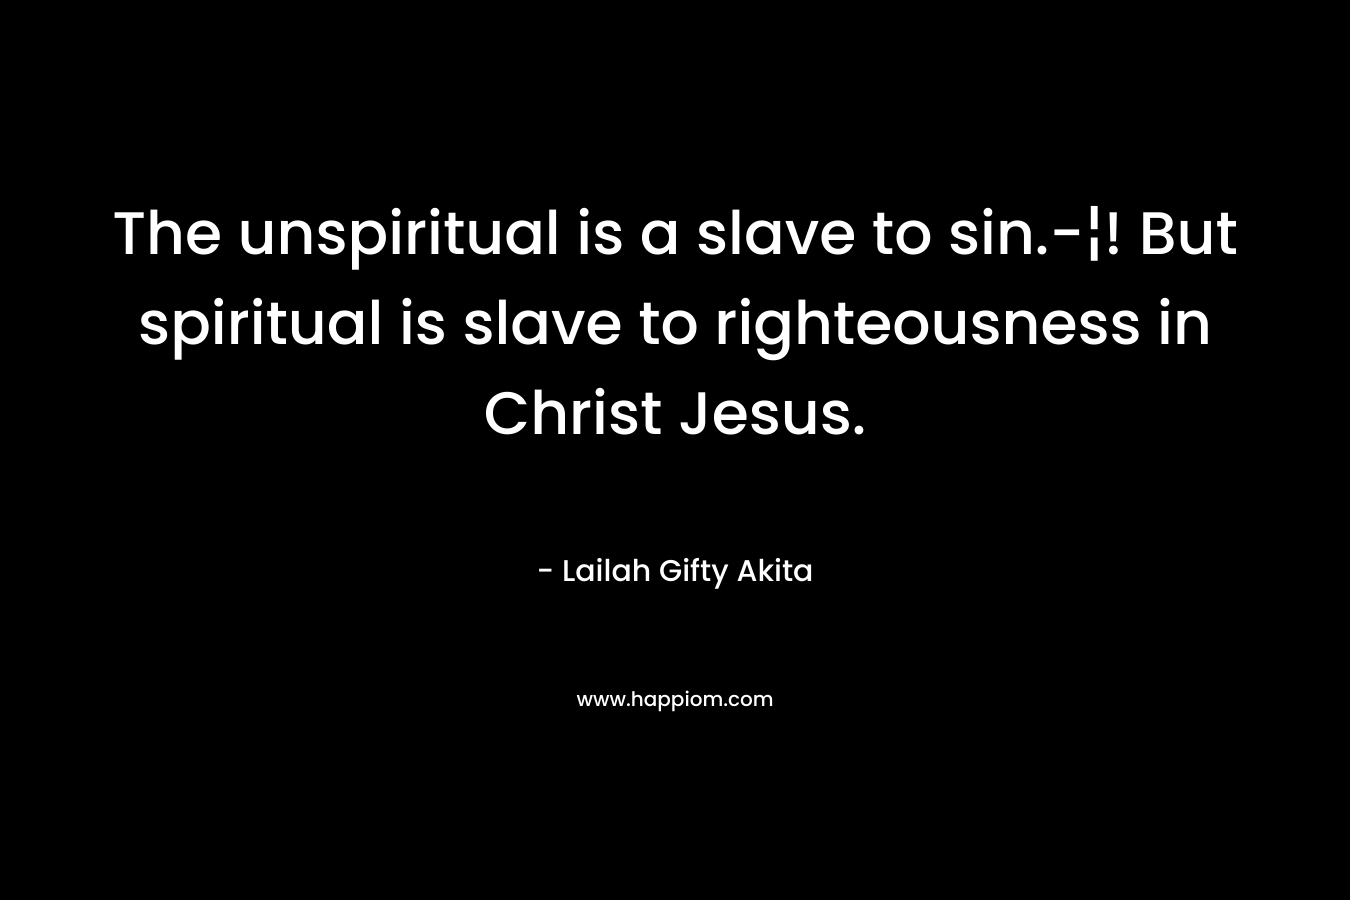 The unspiritual is a slave to sin.-¦! But spiritual is slave to righteousness in Christ Jesus.